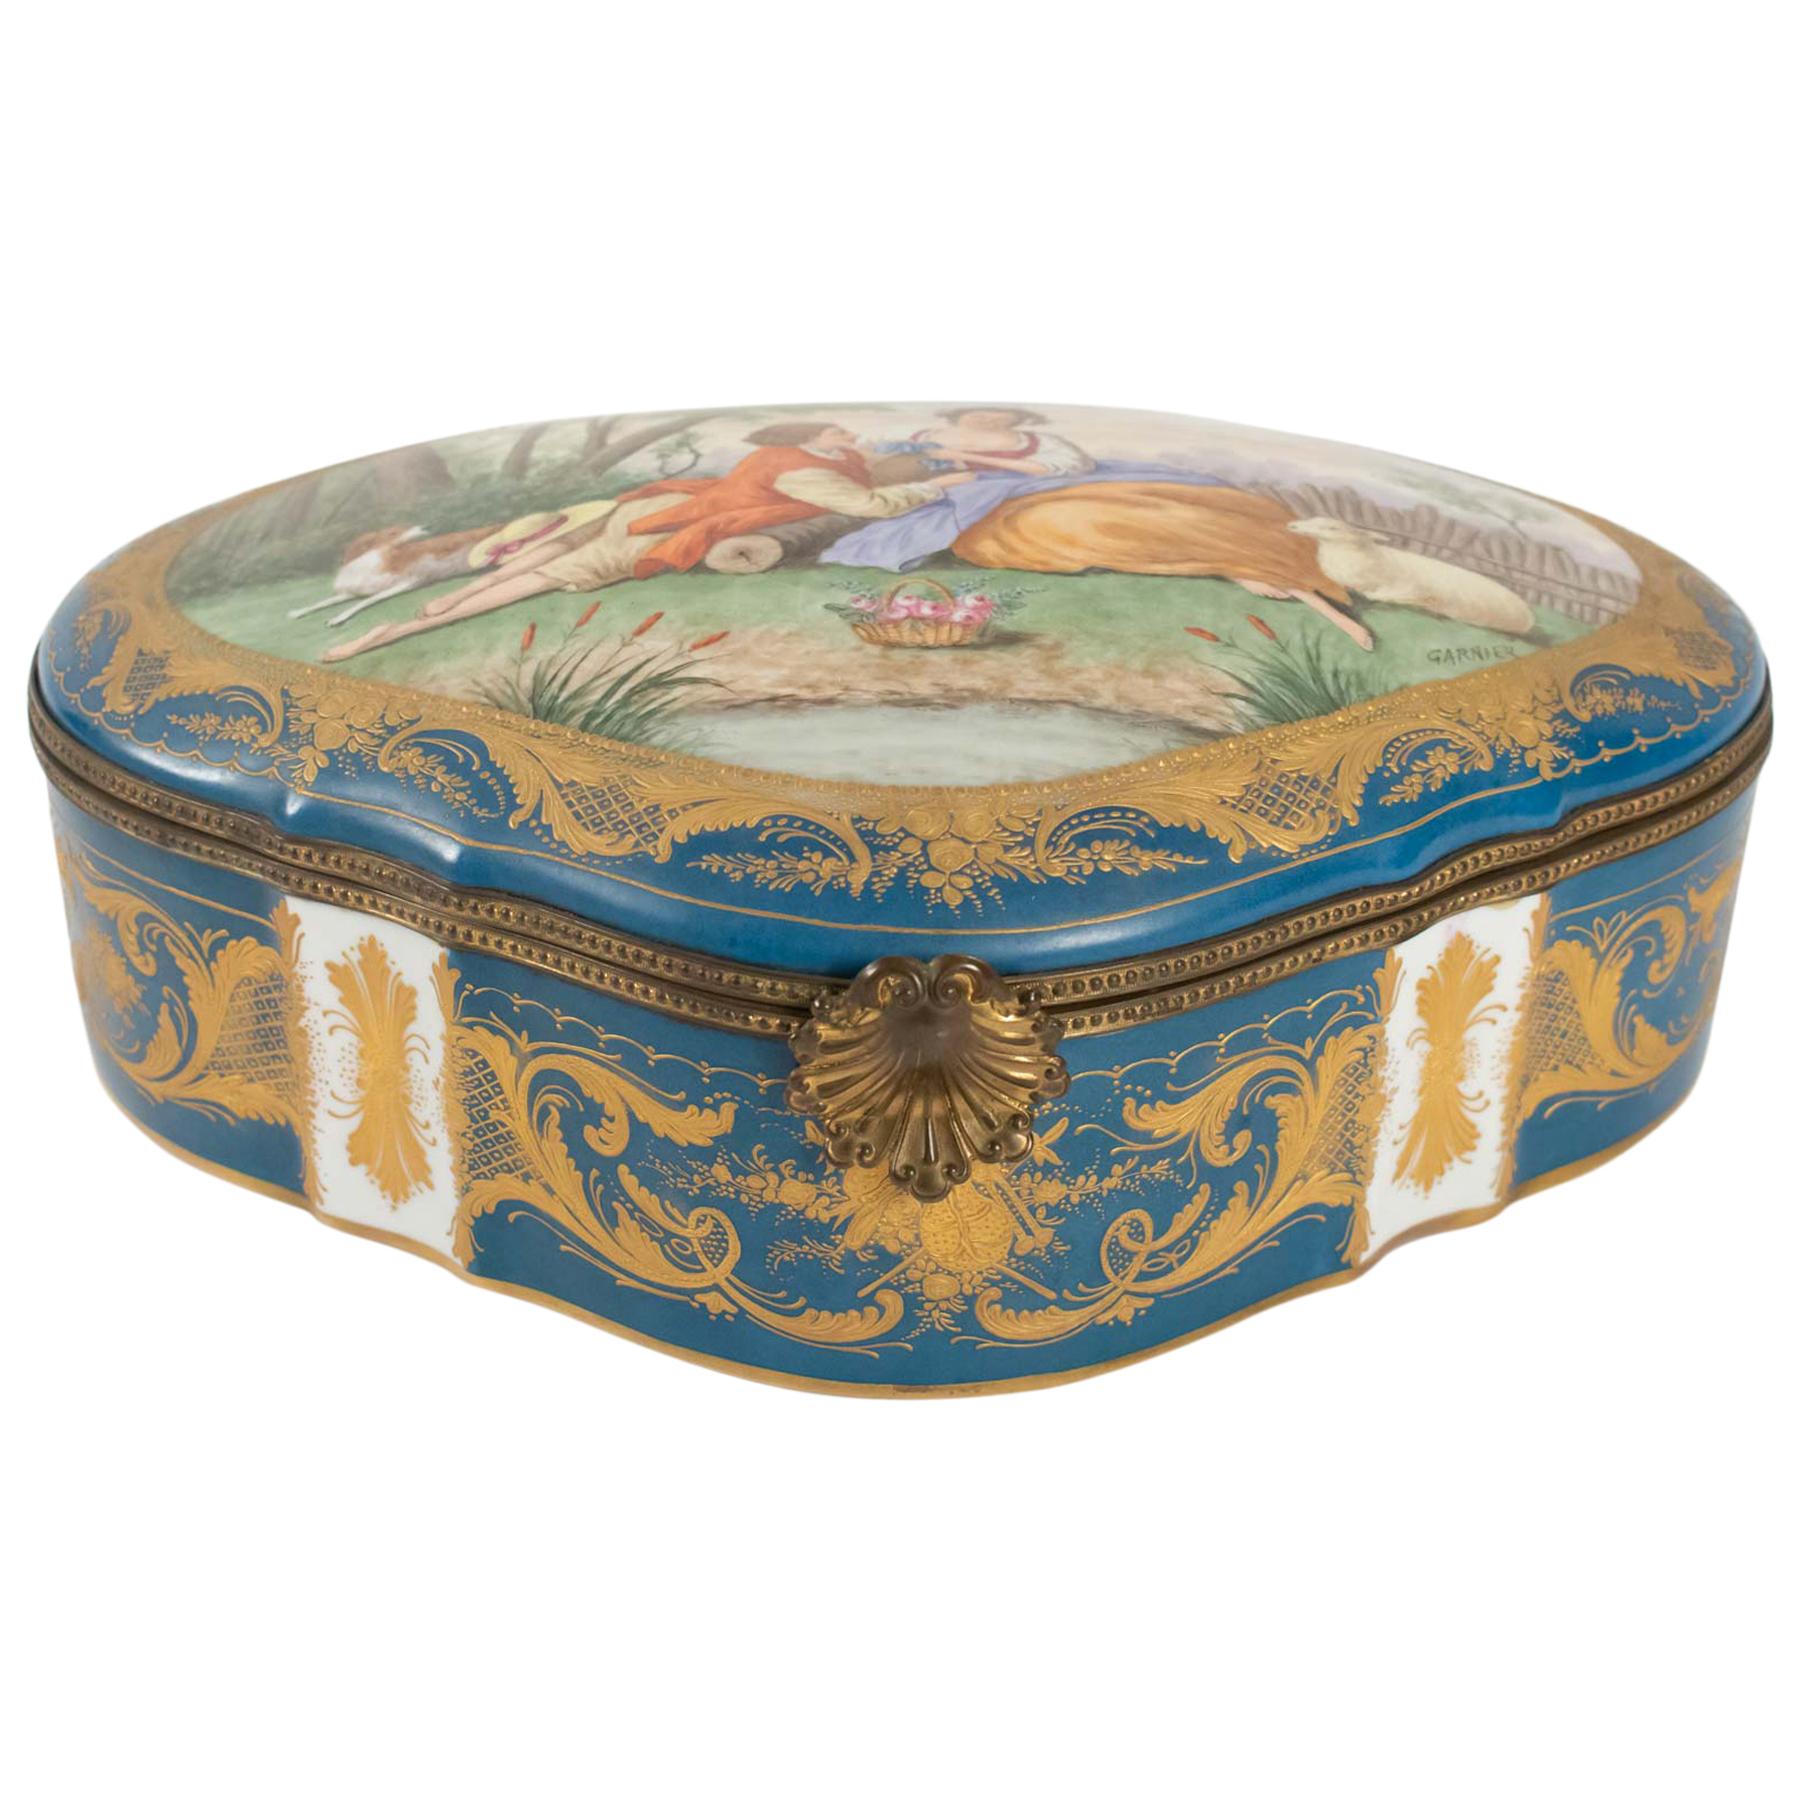 Box Porcelain, Signed, Decorated Inside and Outside, 19th Century